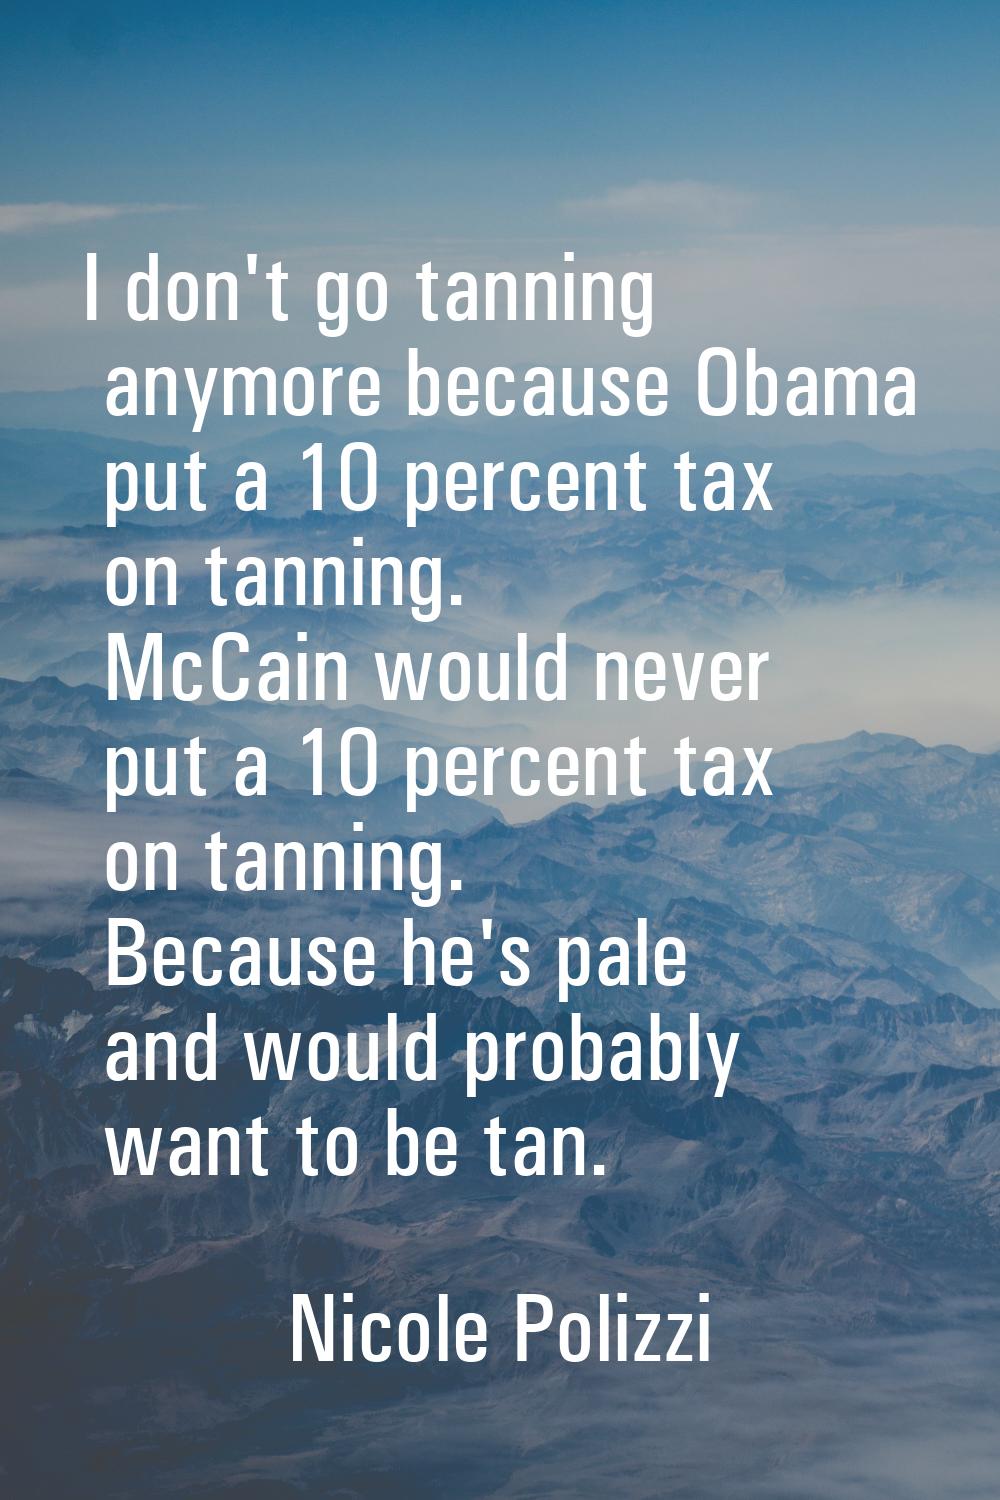 I don't go tanning anymore because Obama put a 10 percent tax on tanning. McCain would never put a 